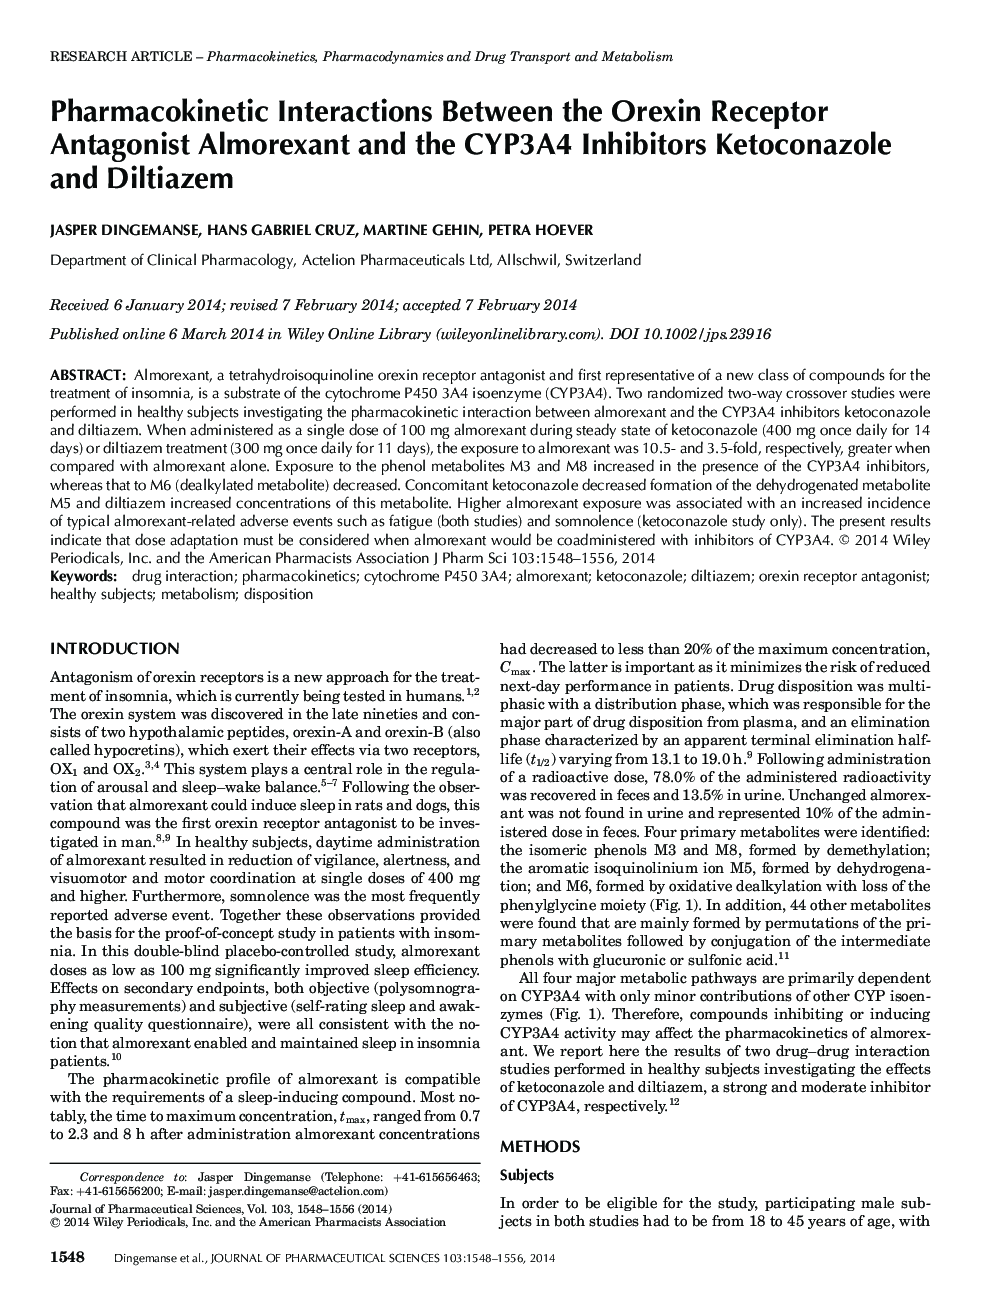 Pharmacokinetic Interactions Between the Orexin Receptor Antagonist Almorexant and the CYP3A4 Inhibitors Ketoconazole and Diltiazem